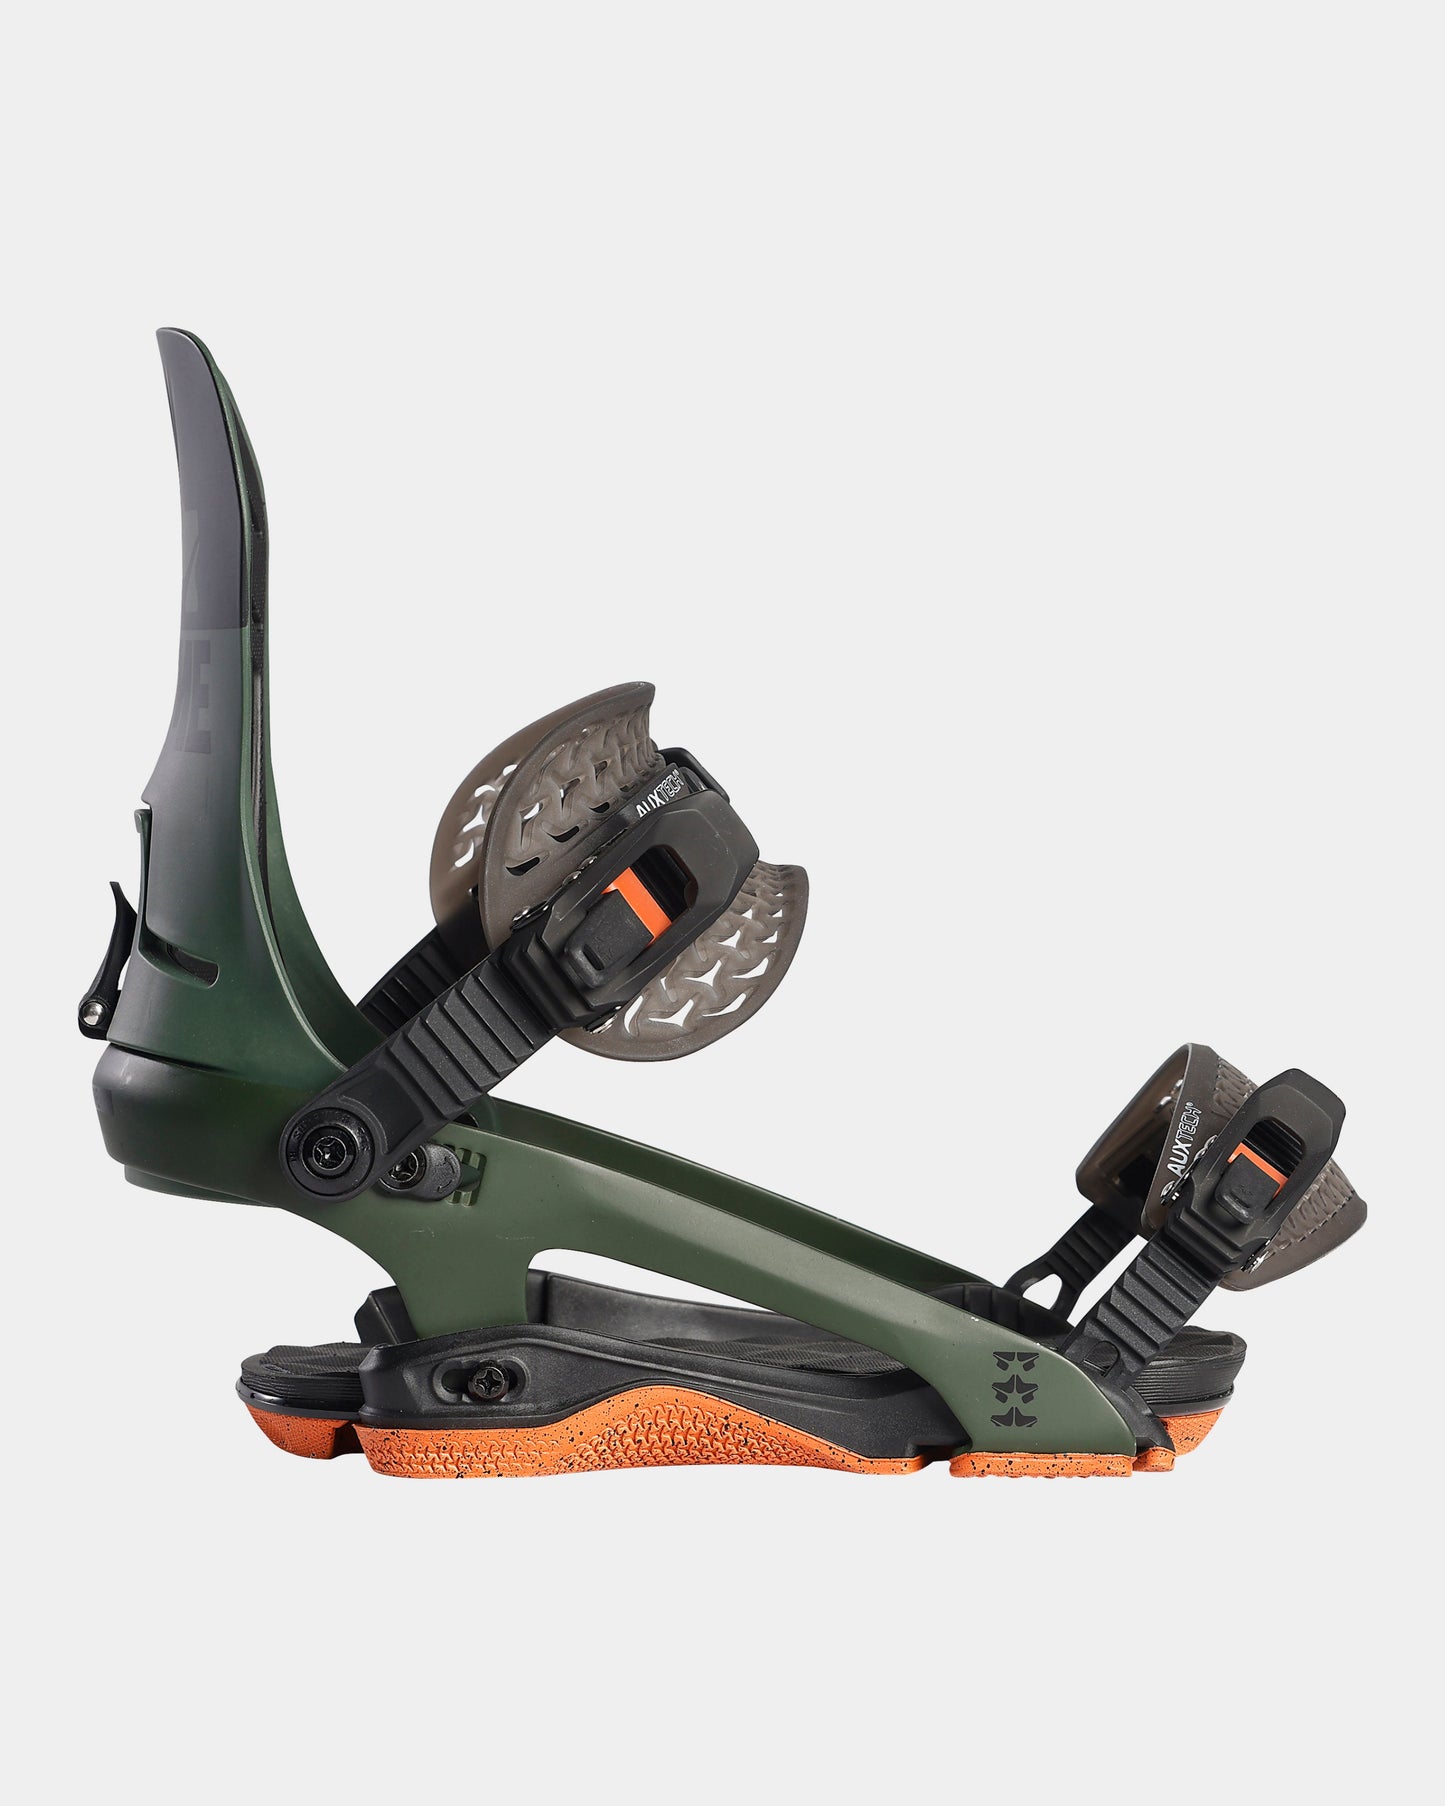 Rome dod 2023 rome sds bindings product photo from the side cover shot in the studio color hunter green